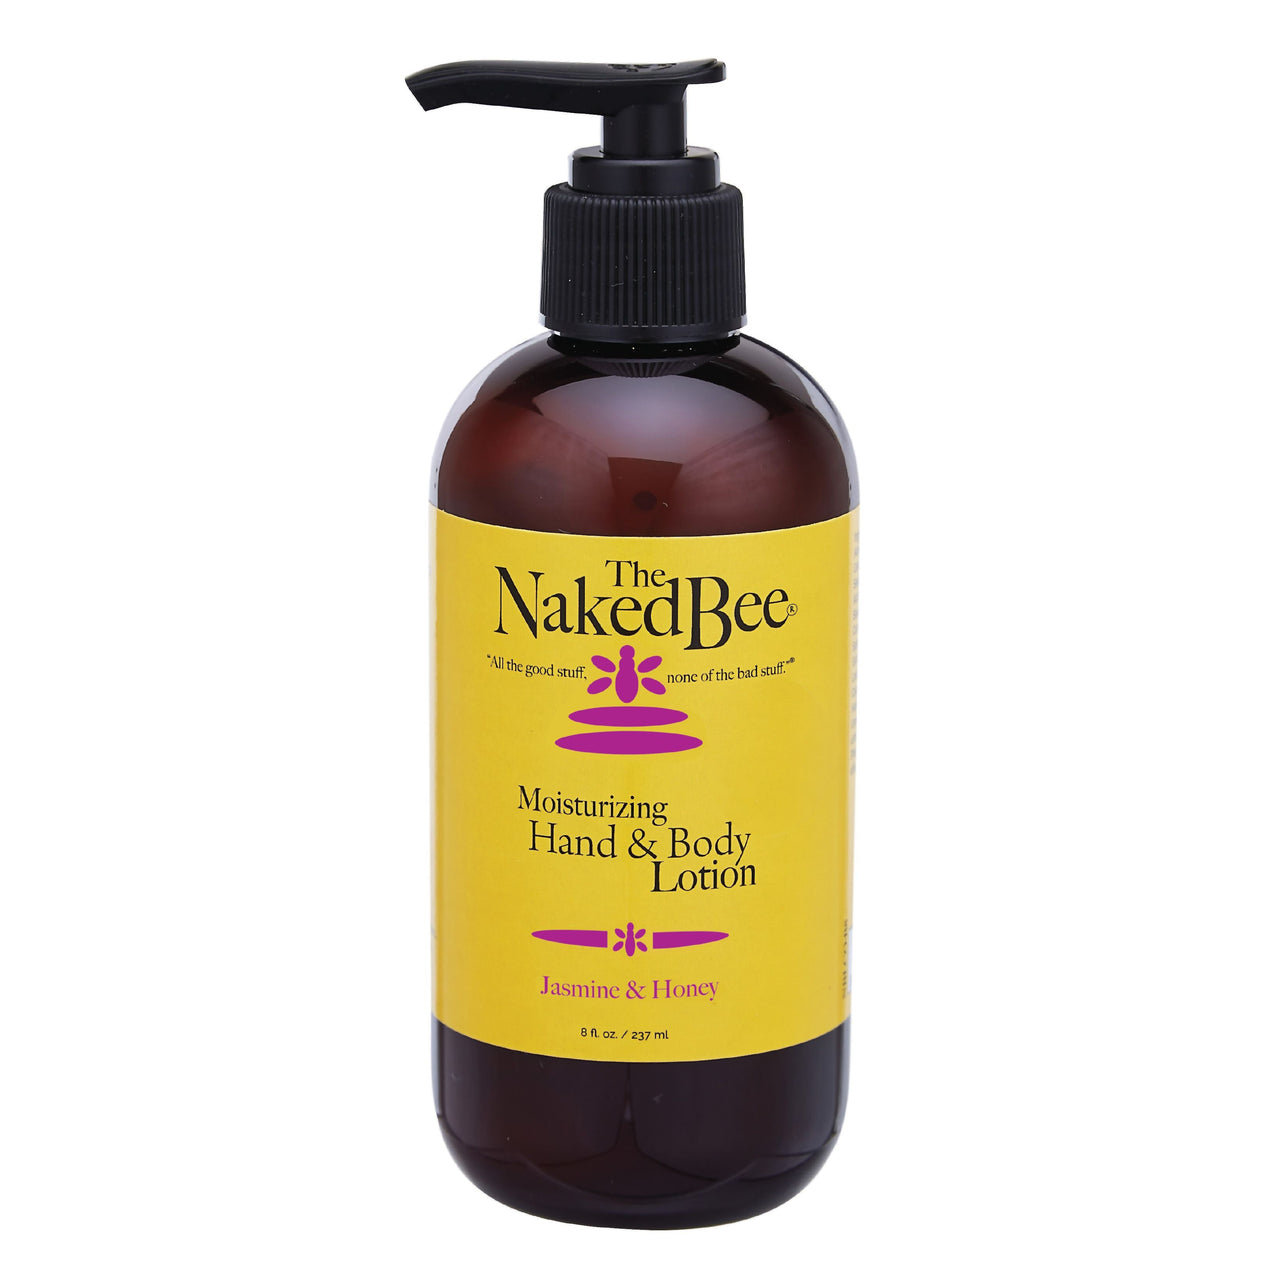 The Naked Bee 8 oz Hand & Body Lotion